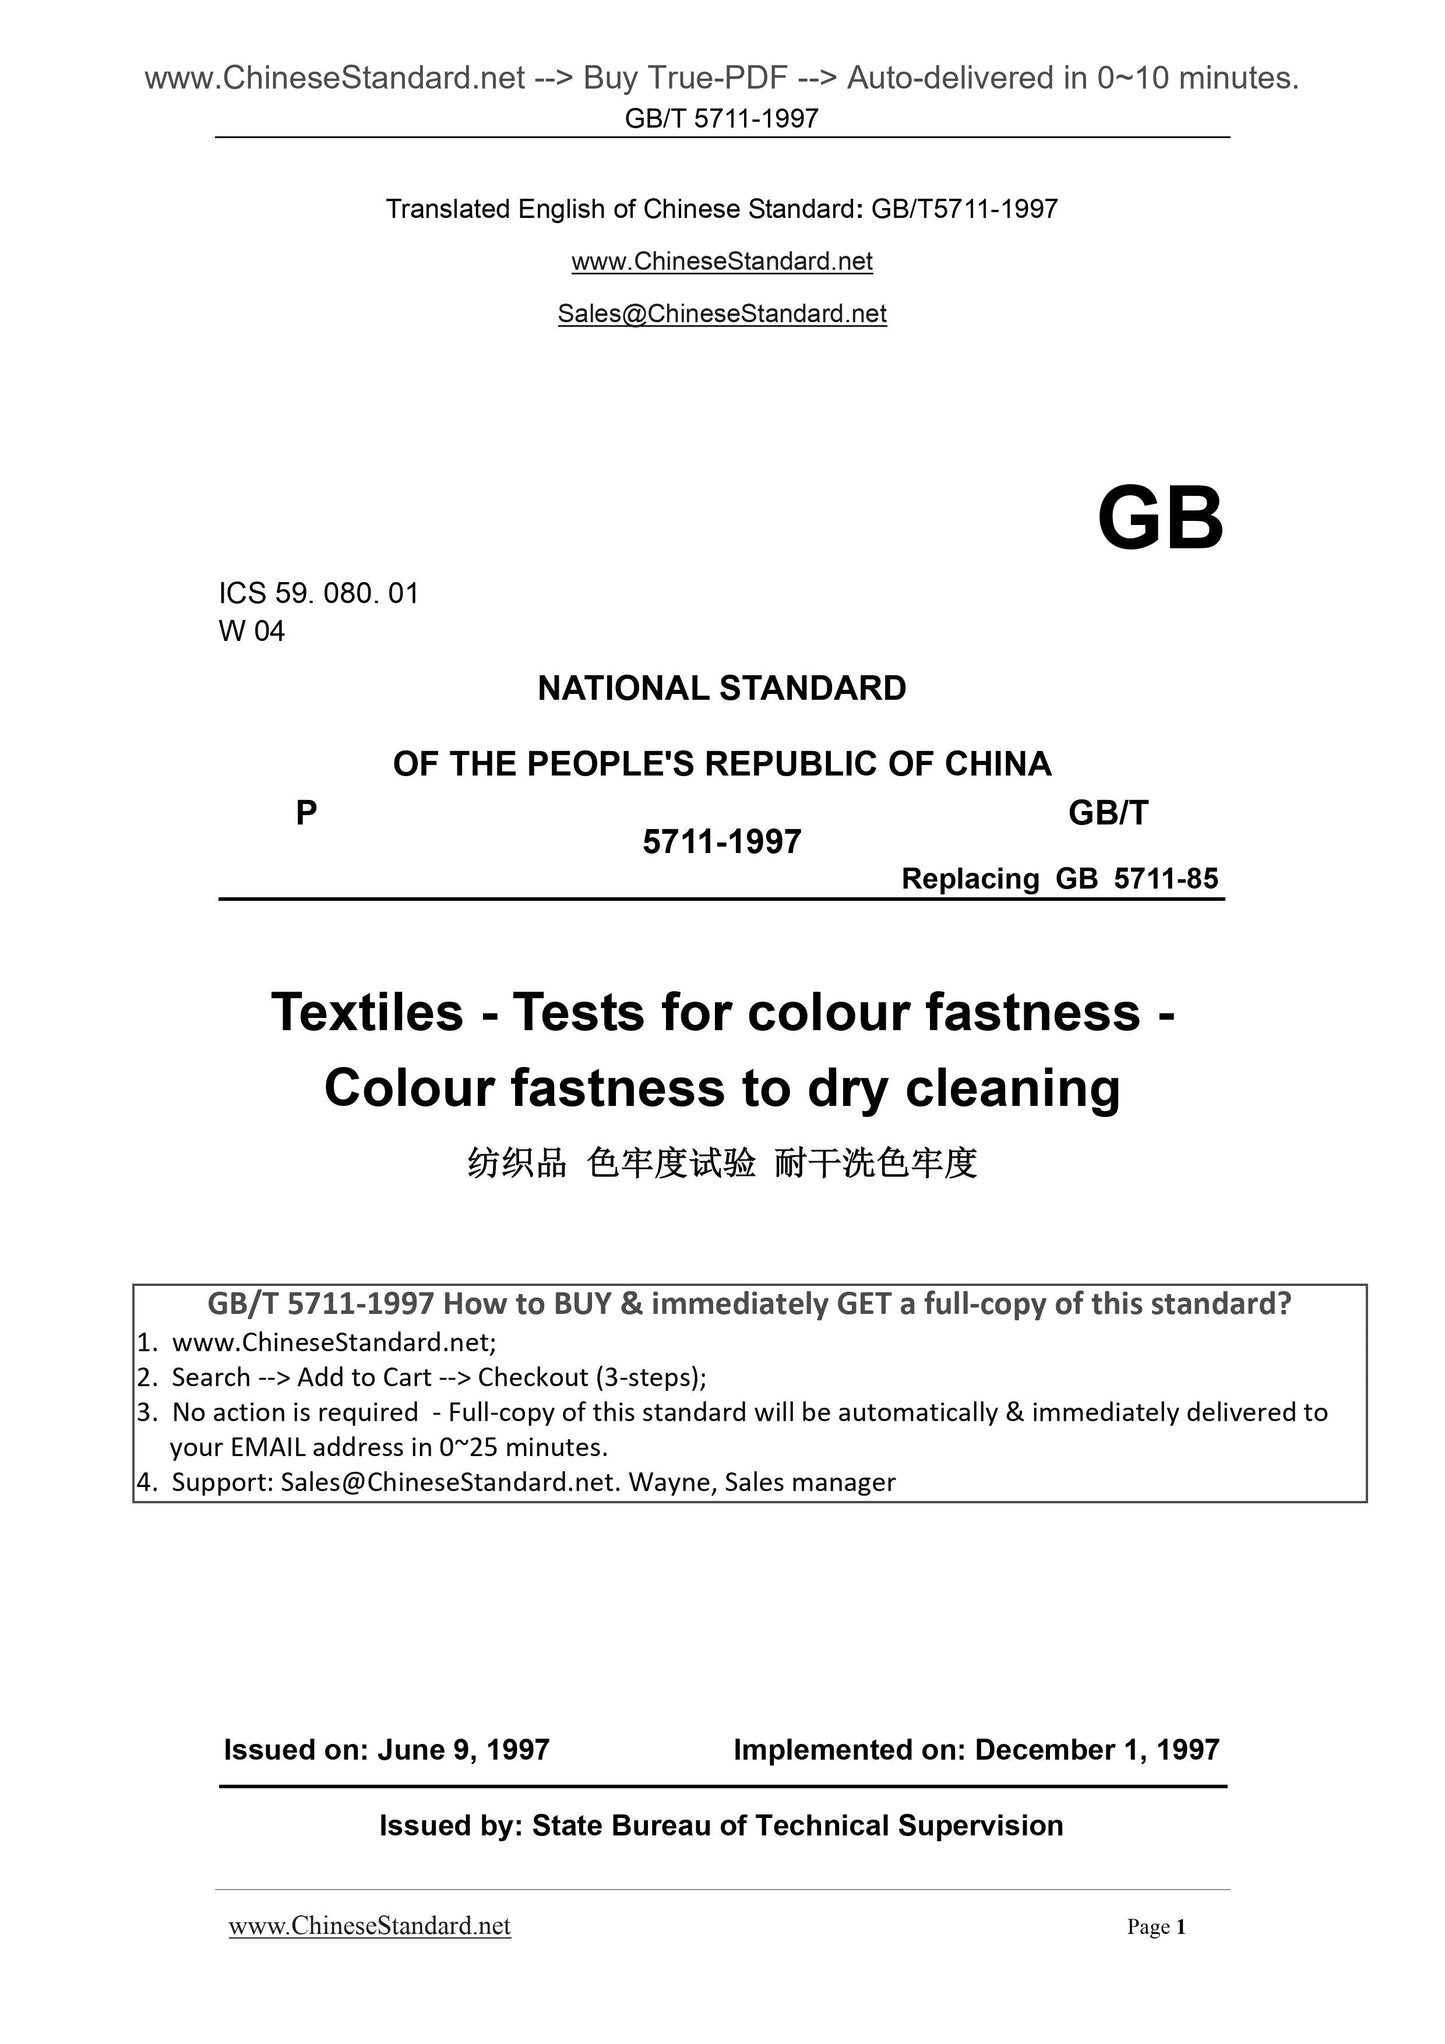 GB/T 5711-1997 Page 1